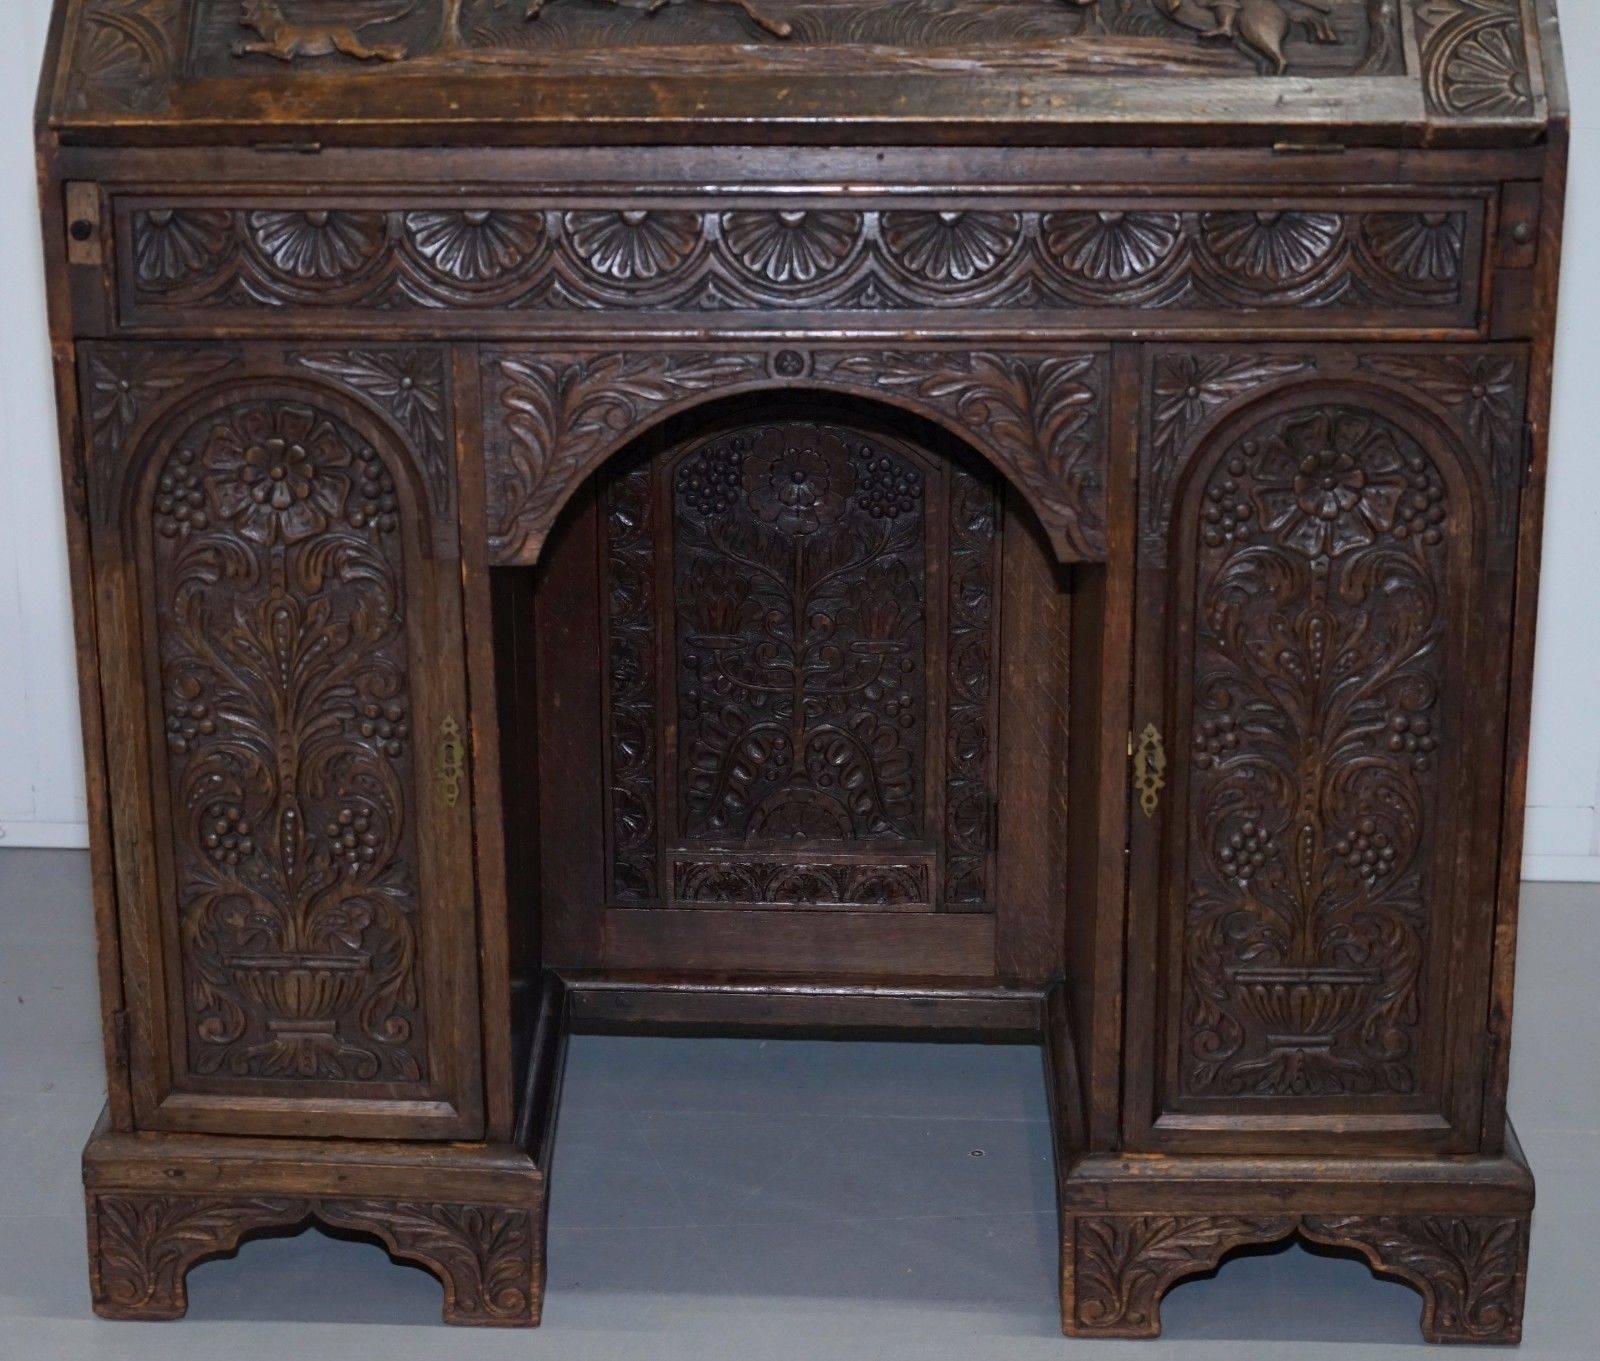 Late 17th Century Rare Charles II 1674 Carved with Hunting Scenes Writing Bureau Desk Lots Drawers